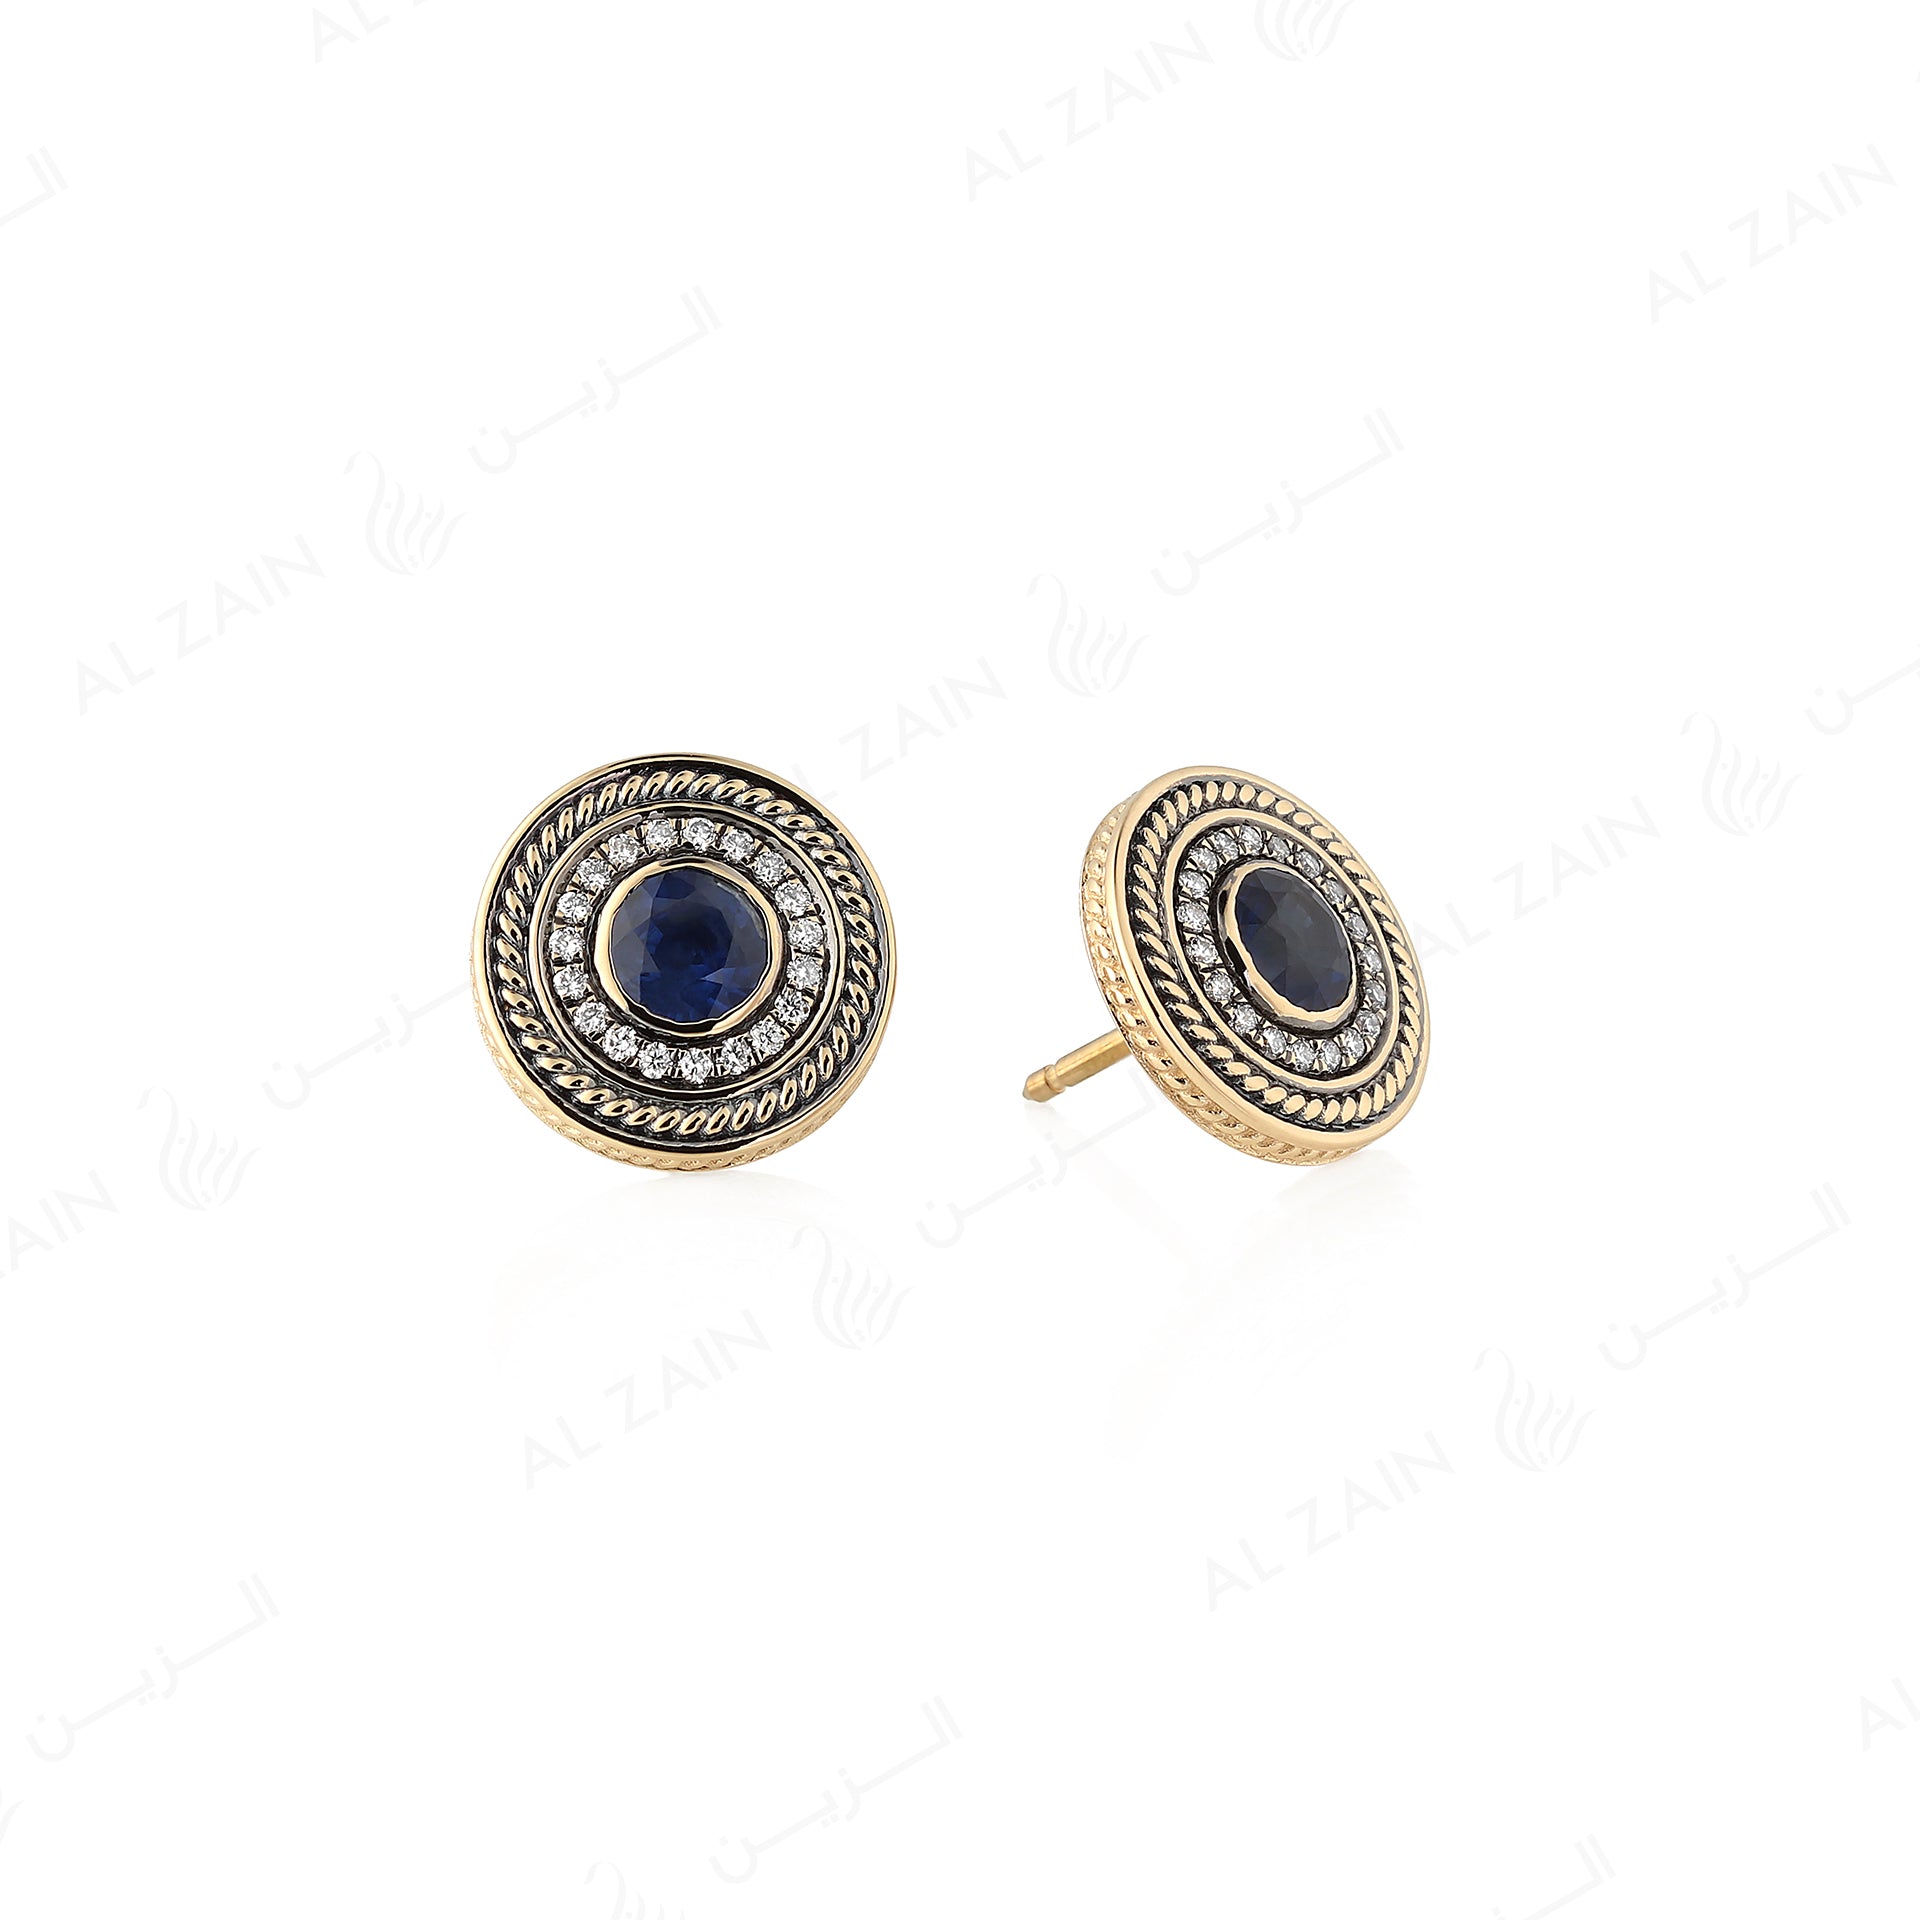 18k Antique Precious Medallion earrings in yellow gold with sapphire and diamonds